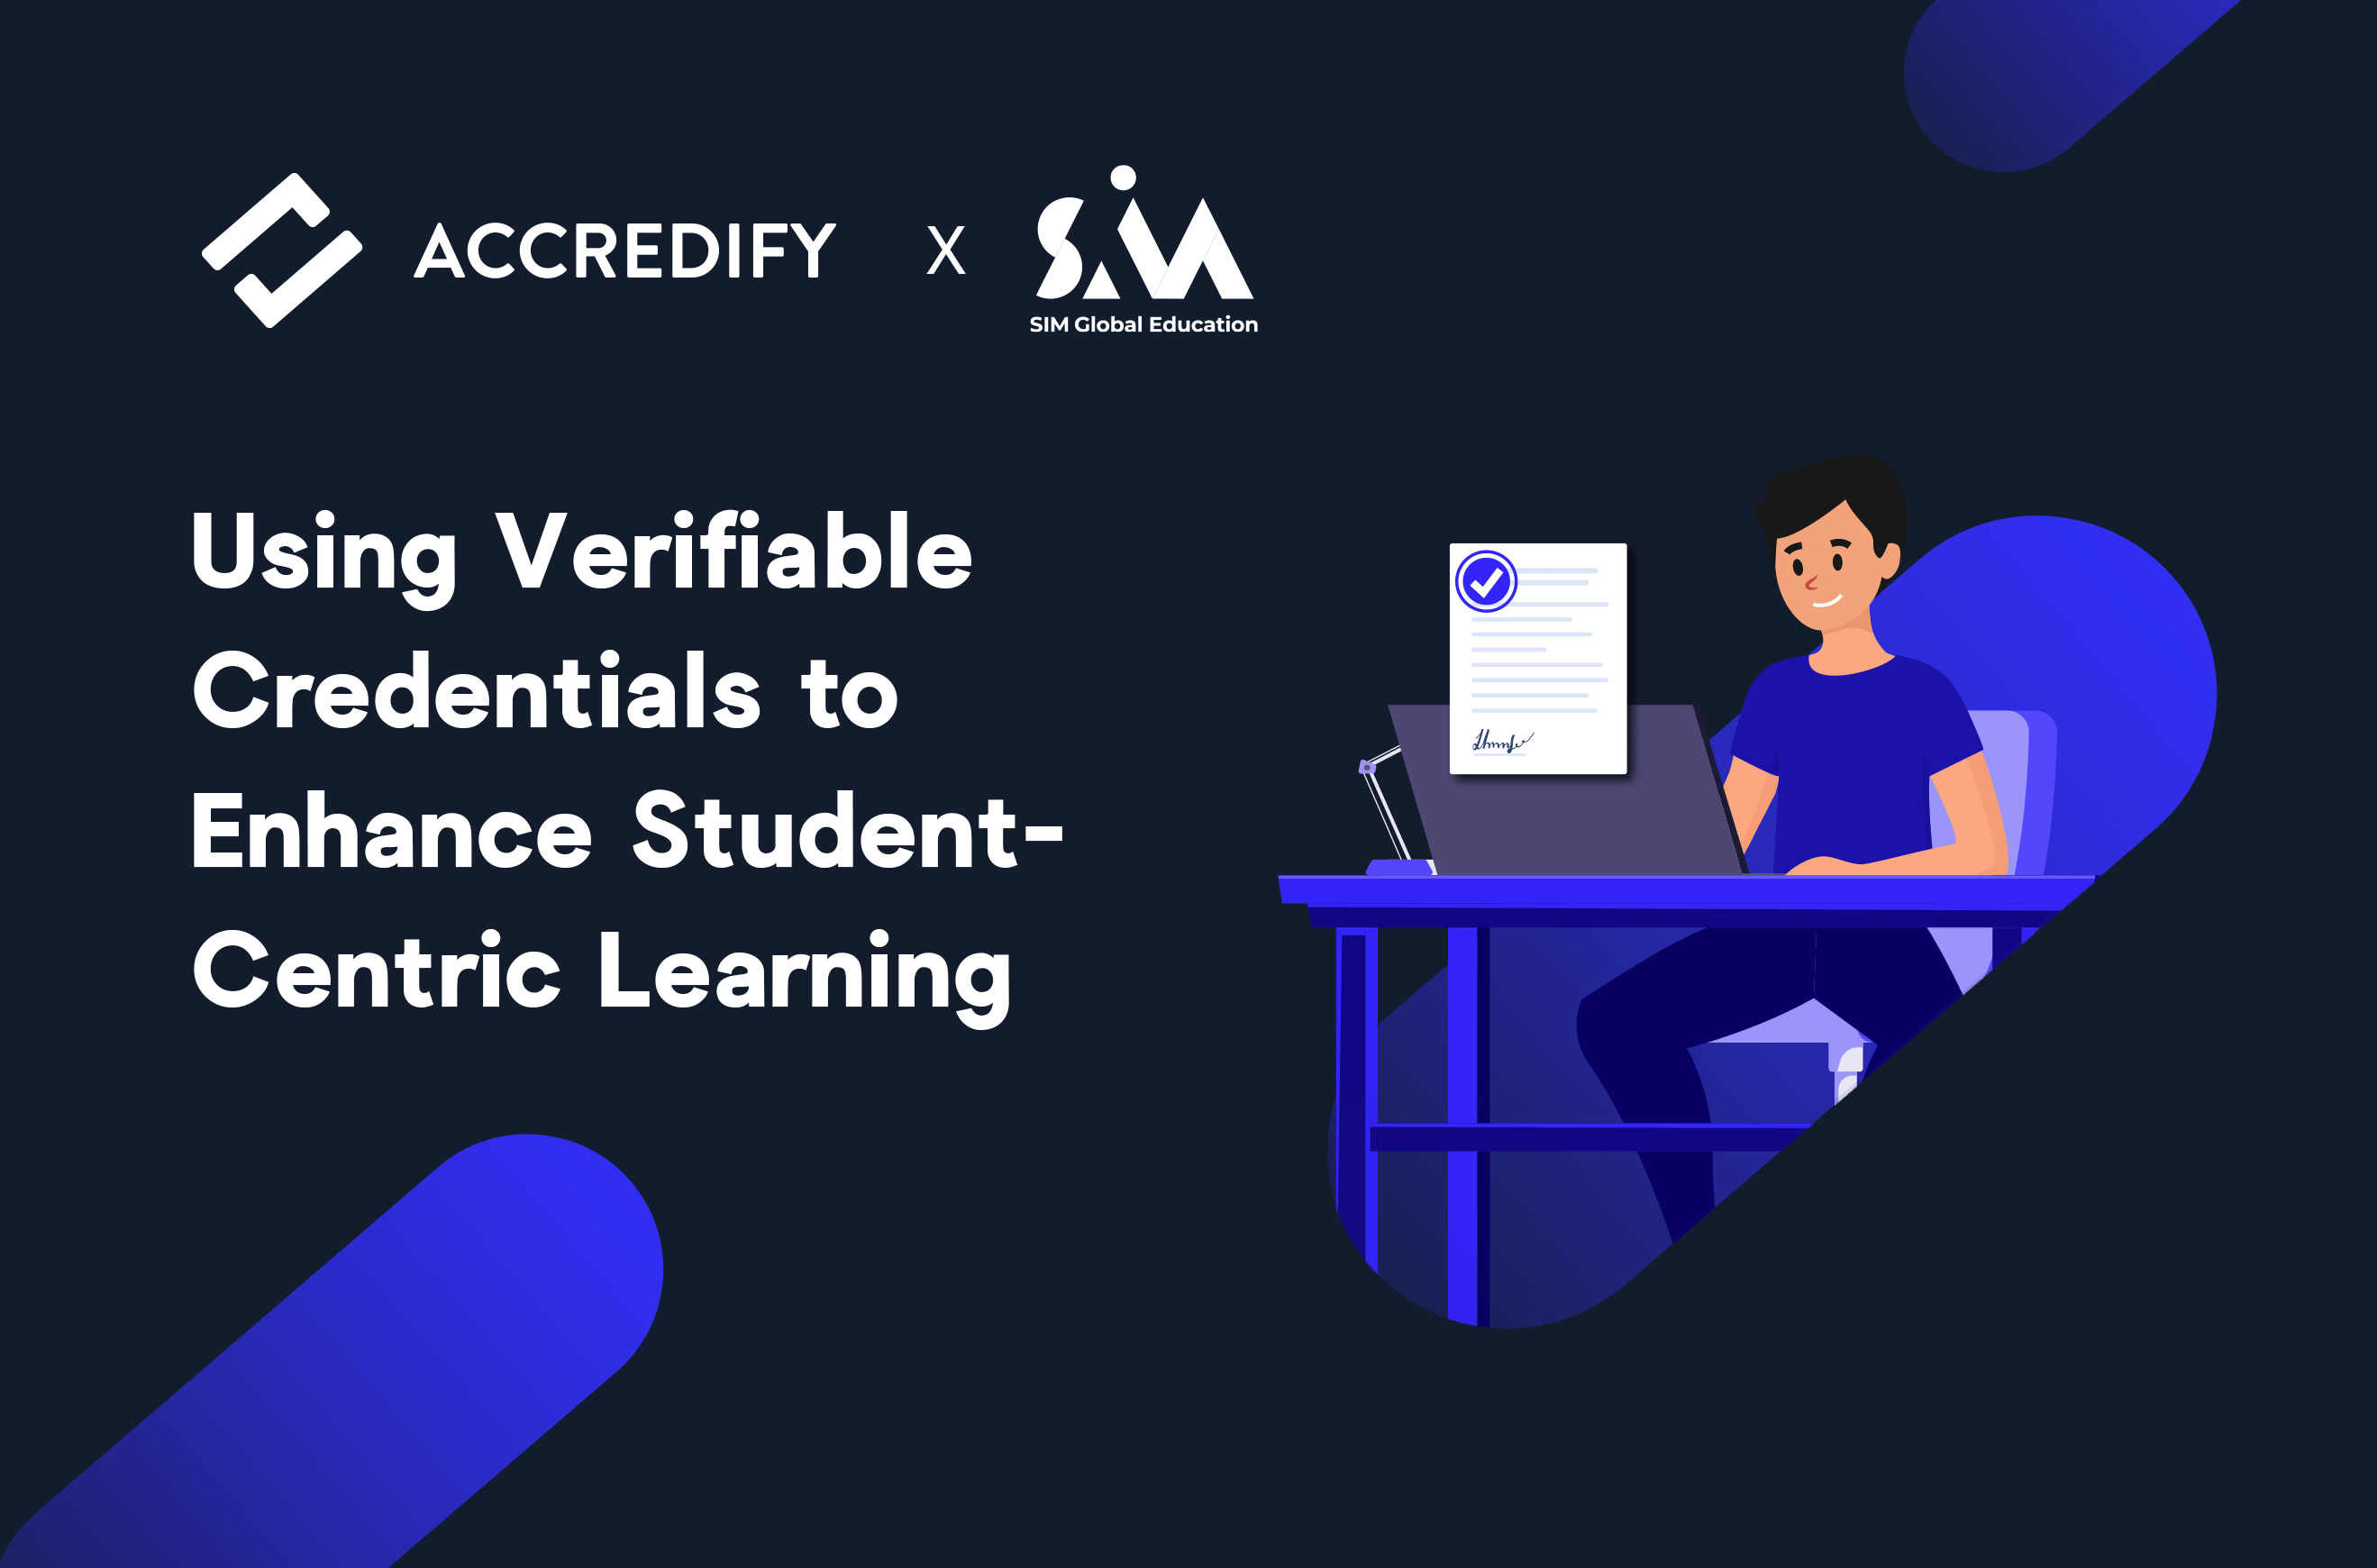 Accredify x SIM Global Education: Using Verifiable Credentials to Enhance Student-Centric Learning